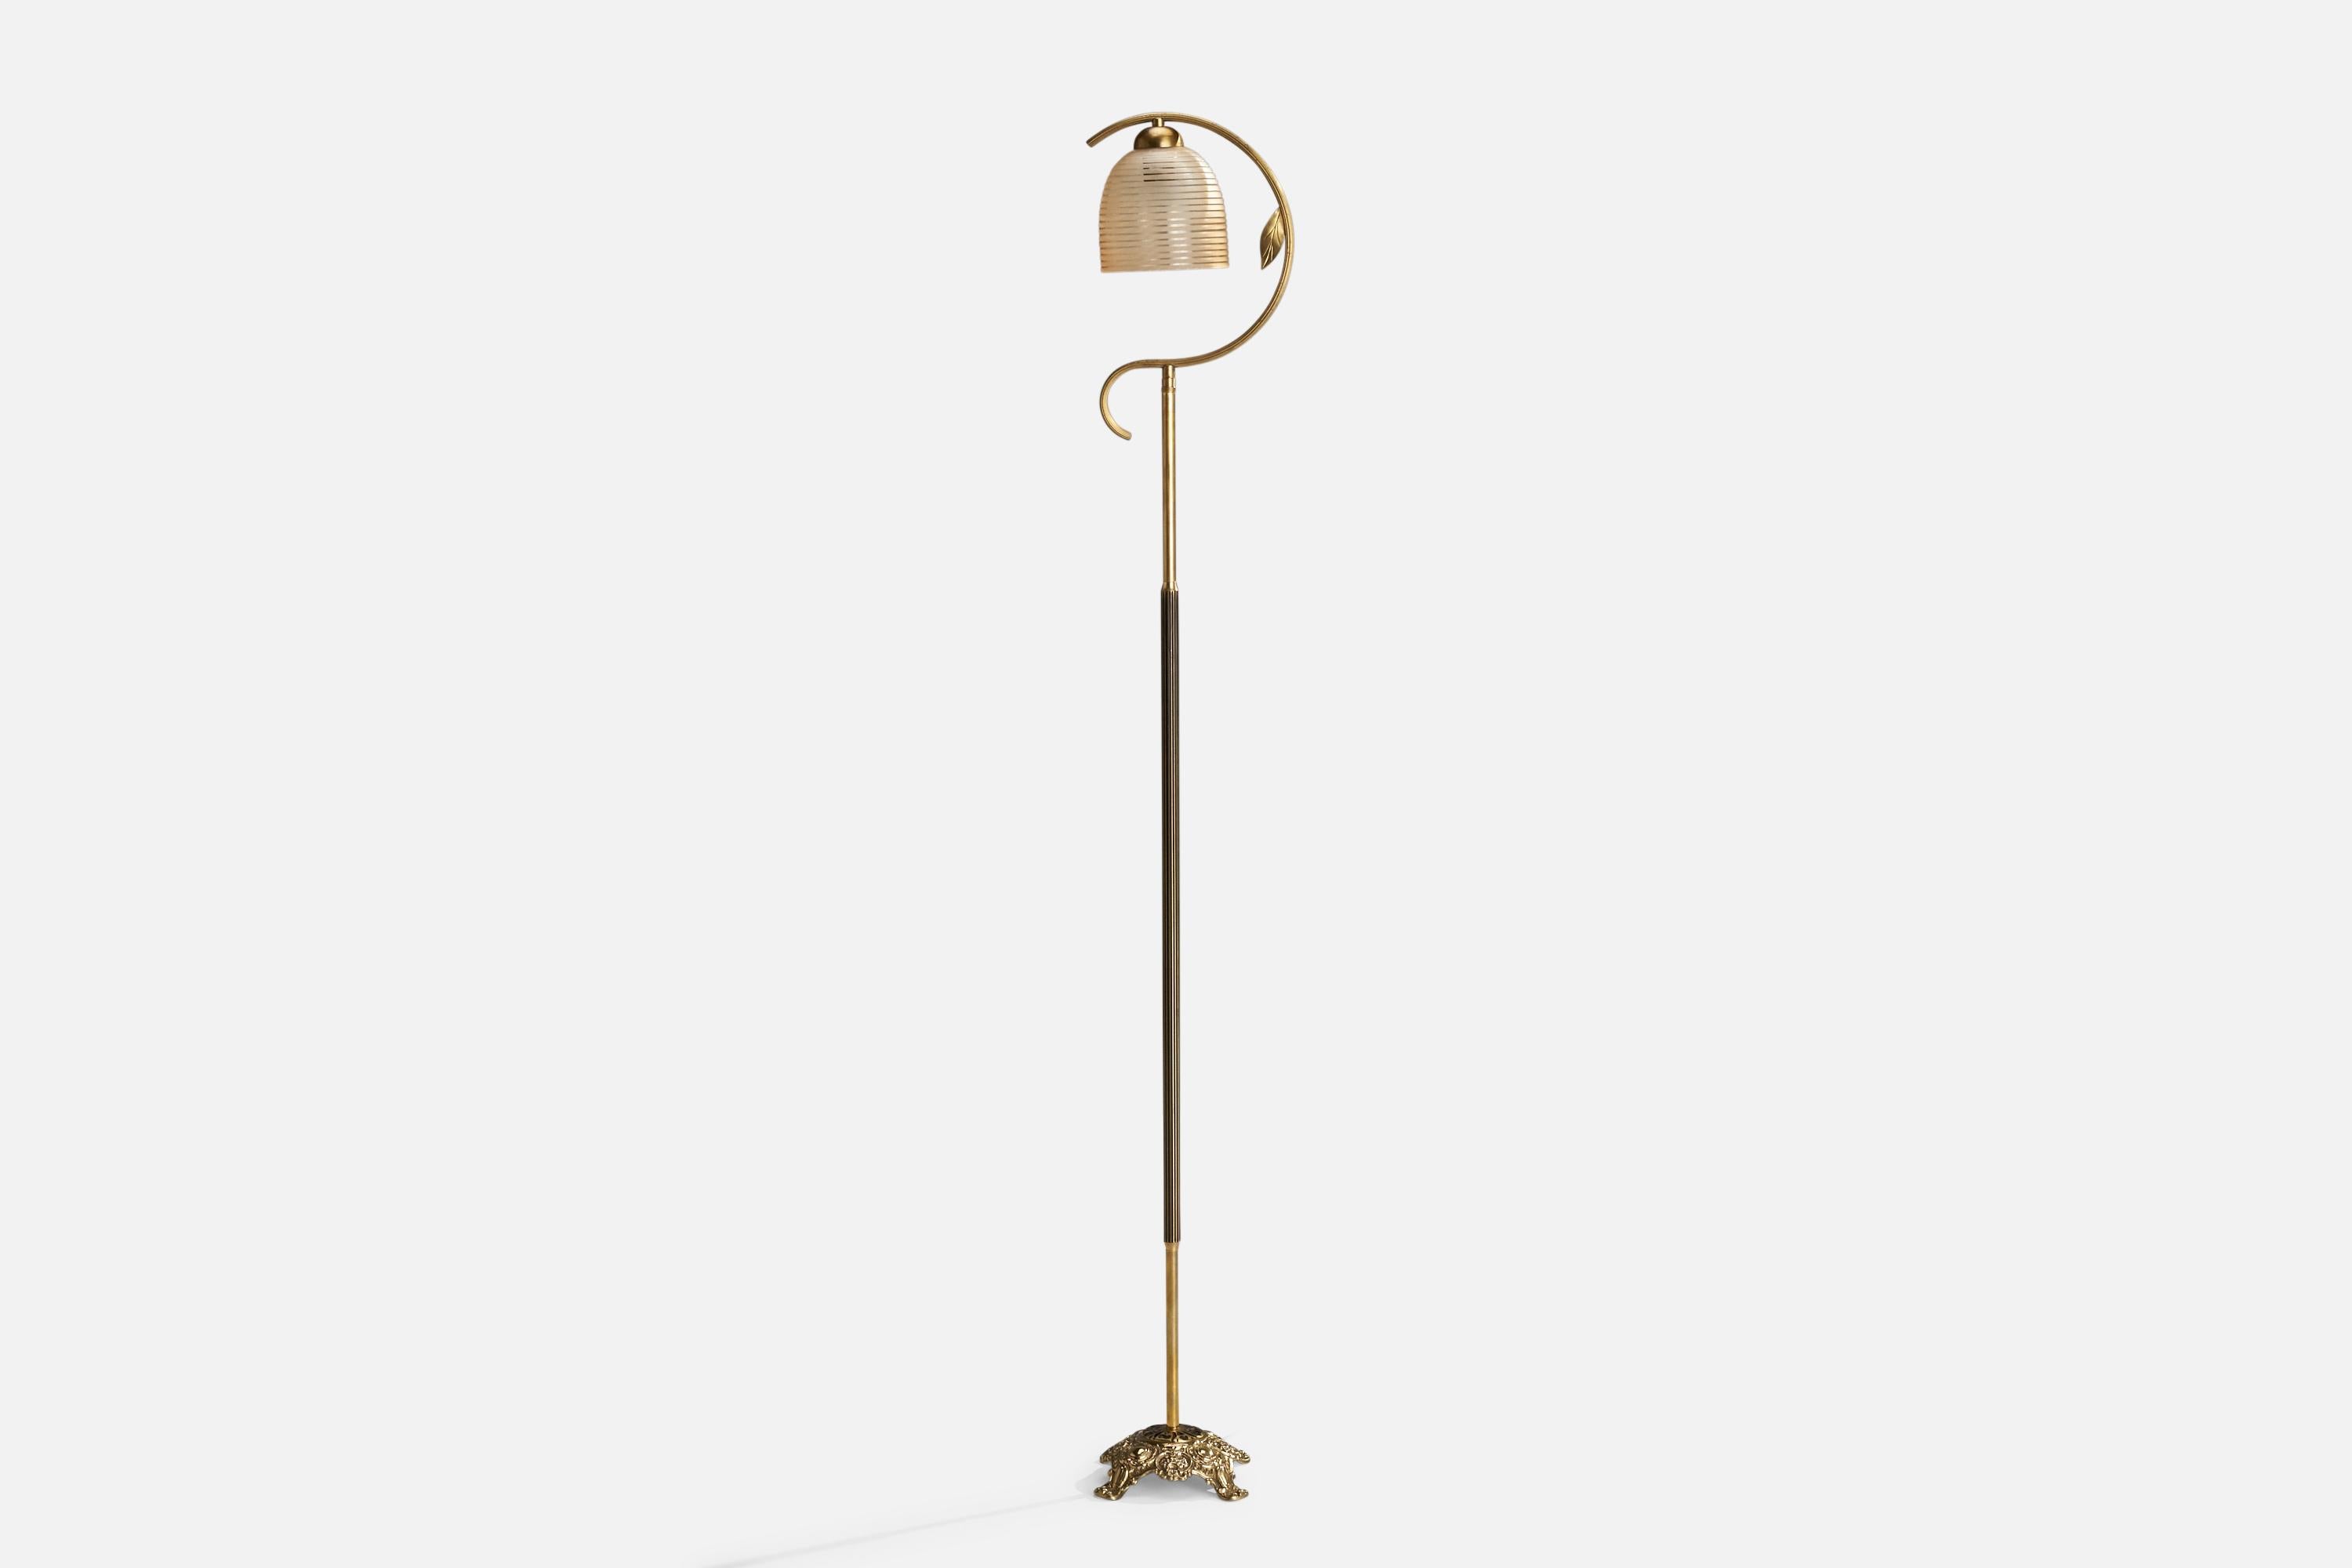 A brass and etched beige glass floor lamp designed and produced in Sweden, c. 1970s.

Overall Dimensions (inches): 60” H x 5.5” W x 8” D
Stated dimensions include shade.
Bulb Specifications: E-26 Bulb
Number of Sockets: 1
All lighting will be